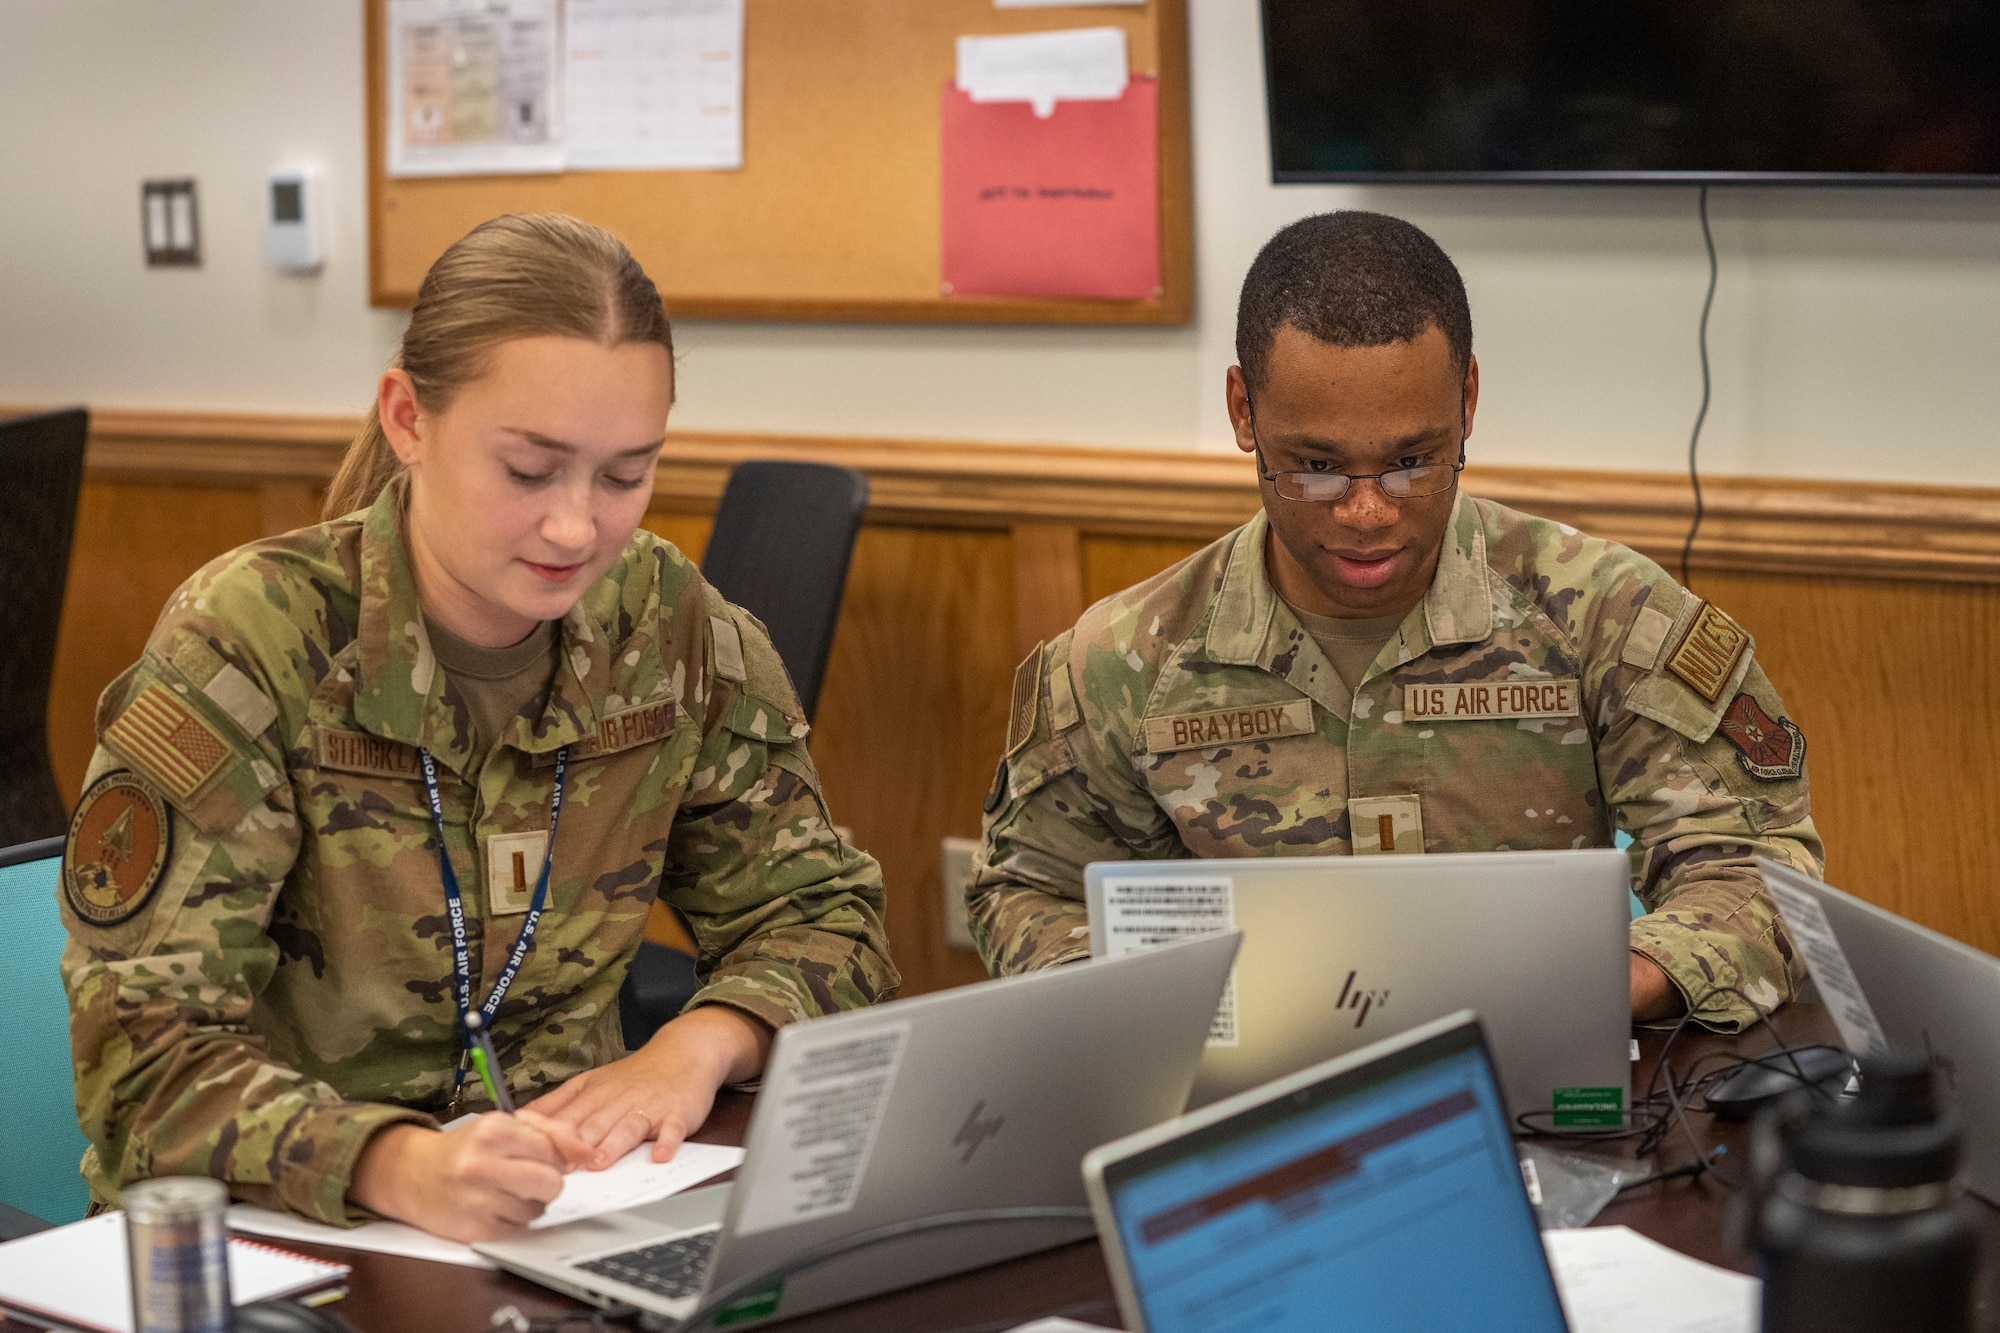 U.S. Air Force 2nd Lts. Morgan Strickland and Ke'Andre Brayboy, 335th Training Squadron operation analysis students, work on calculus problems together at Allee Hall on Keesler Air Force Base, Mississippi, Oct. 10, 2023.